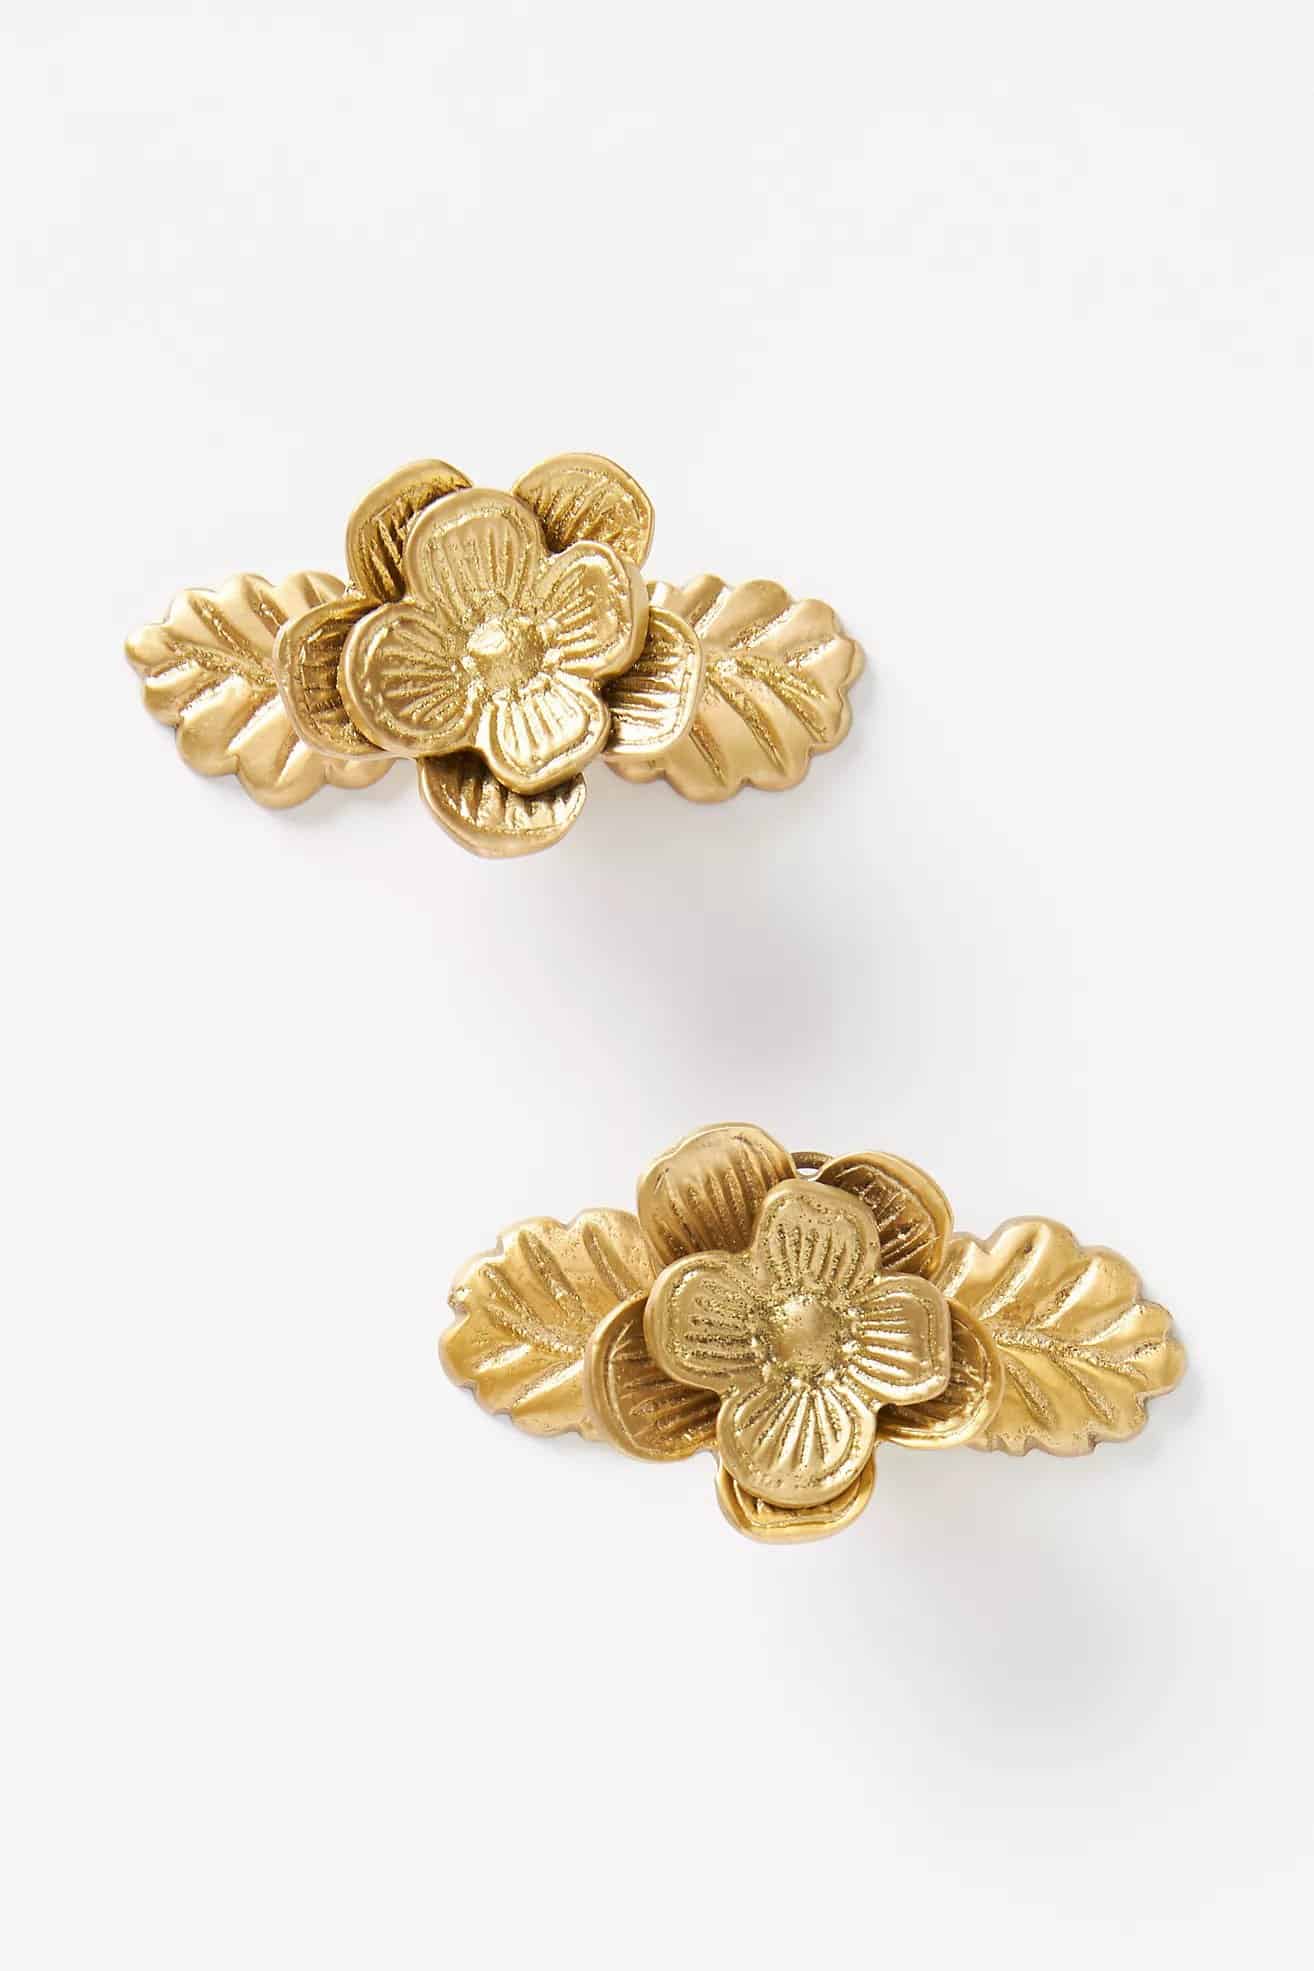 These Golden Floral Knobs Feel Incredibly Opulent